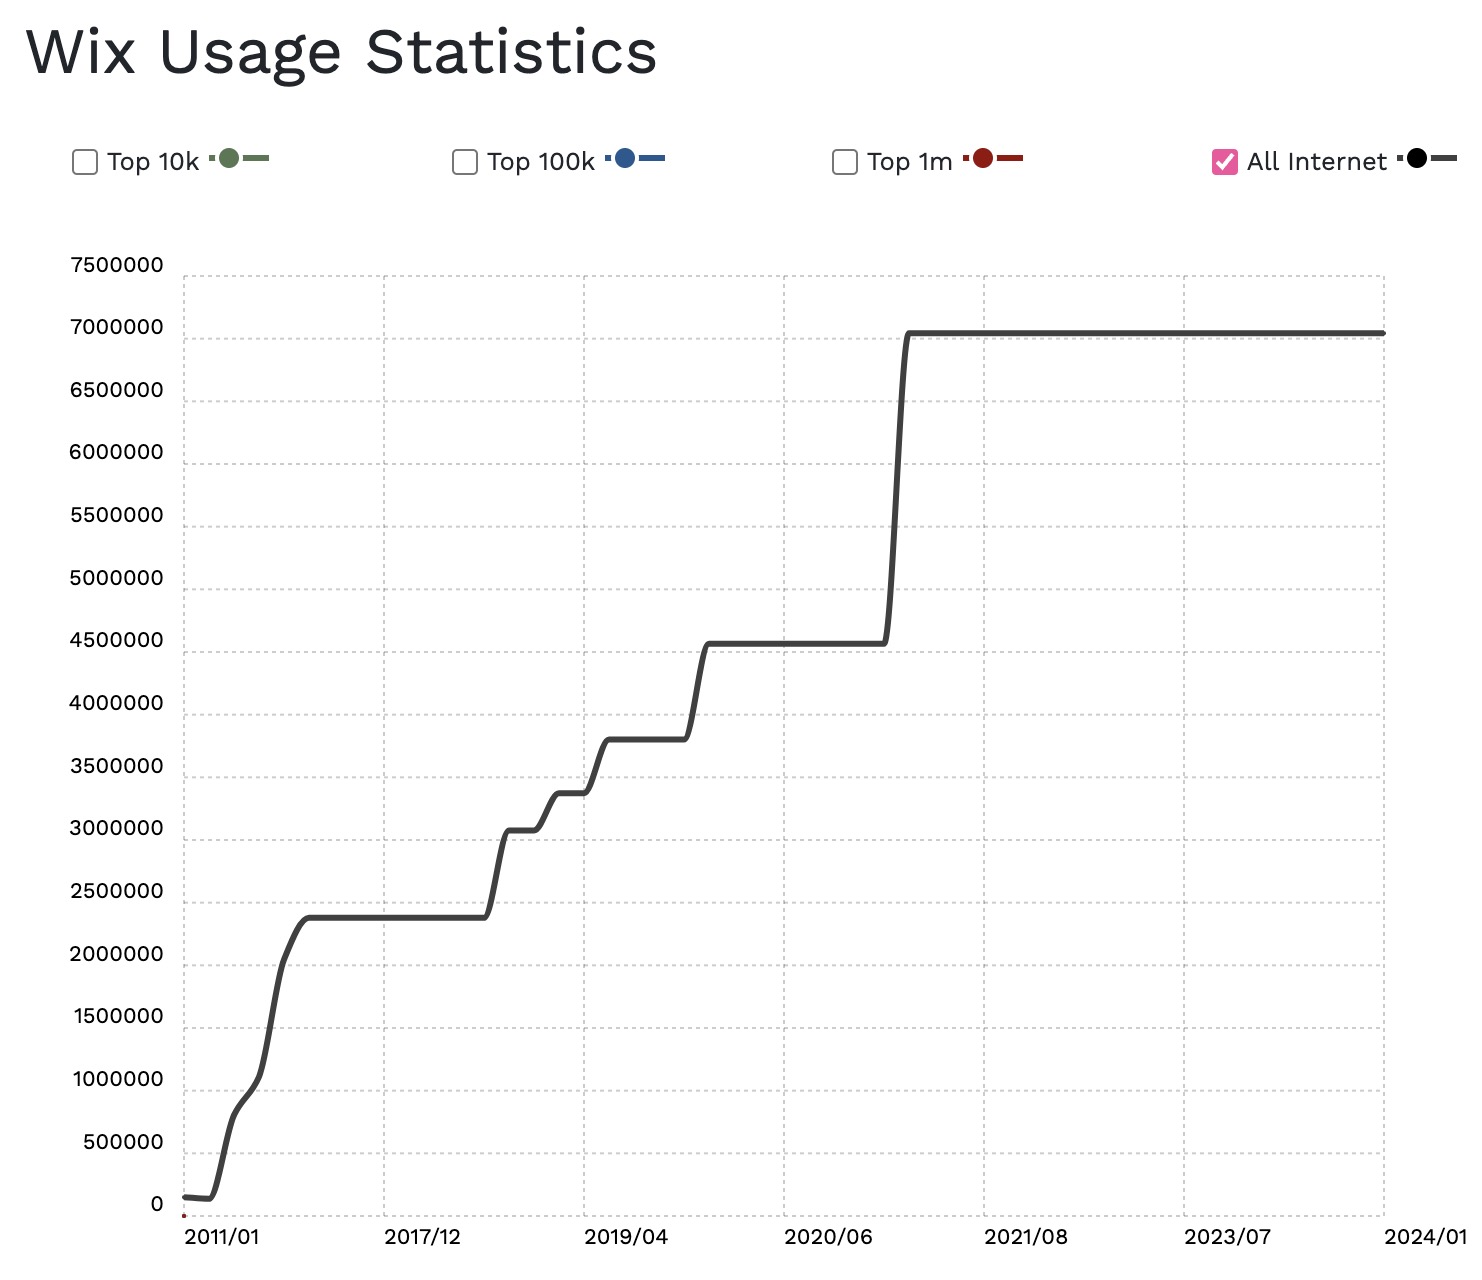 A line graph showing Wix usage has gone up over the years and remains consistently-high since around 2021